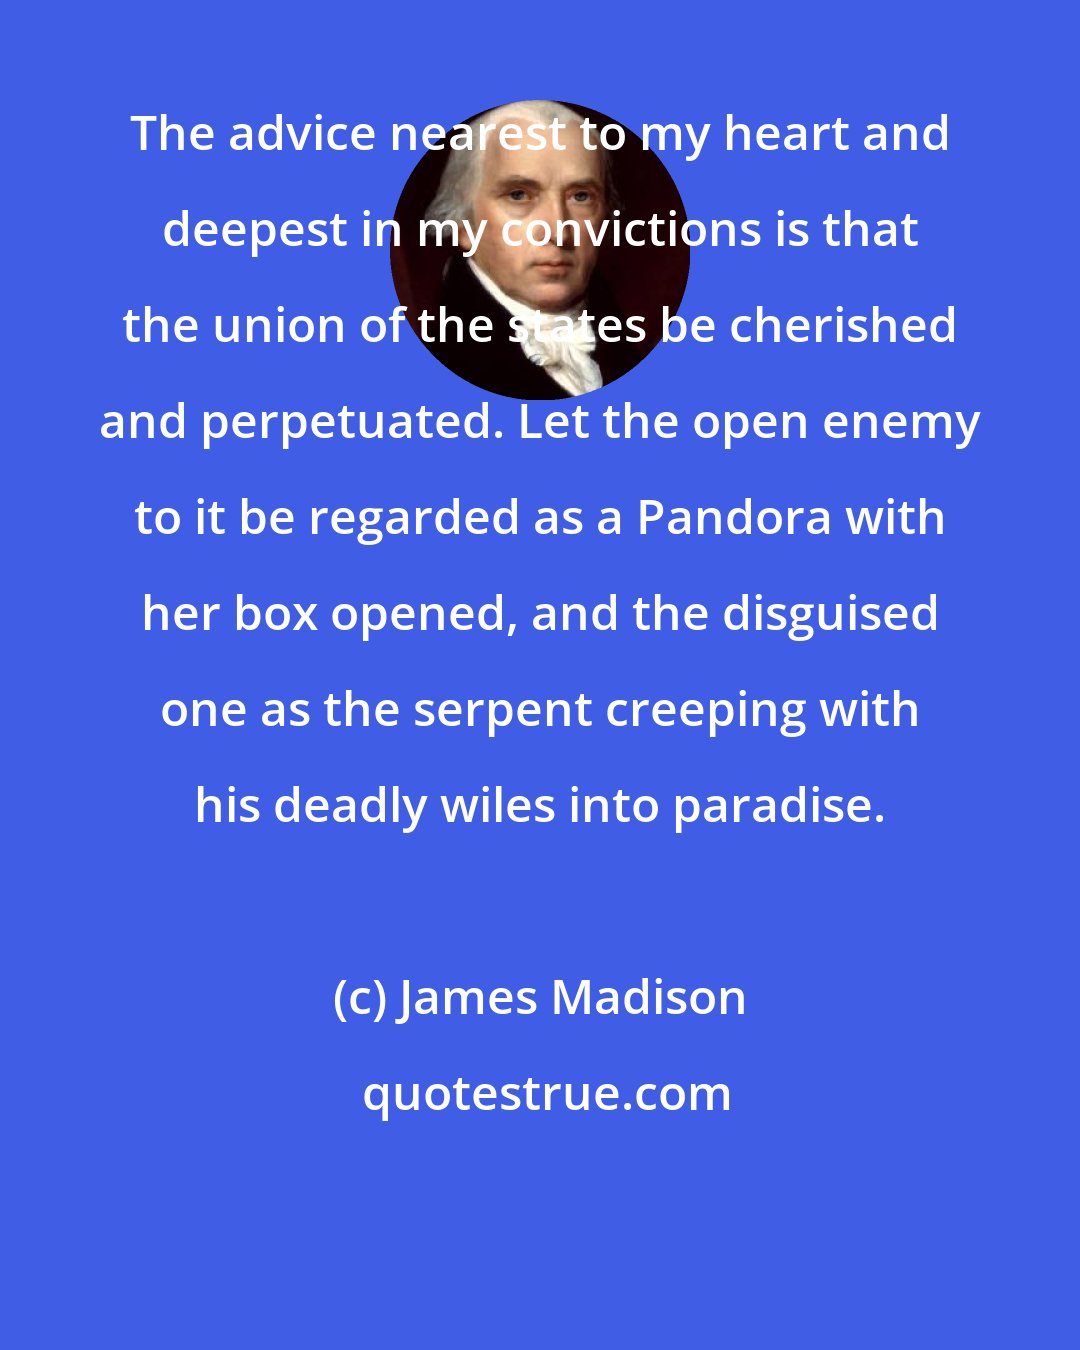 James Madison: The advice nearest to my heart and deepest in my convictions is that the union of the states be cherished and perpetuated. Let the open enemy to it be regarded as a Pandora with her box opened, and the disguised one as the serpent creeping with his deadly wiles into paradise.